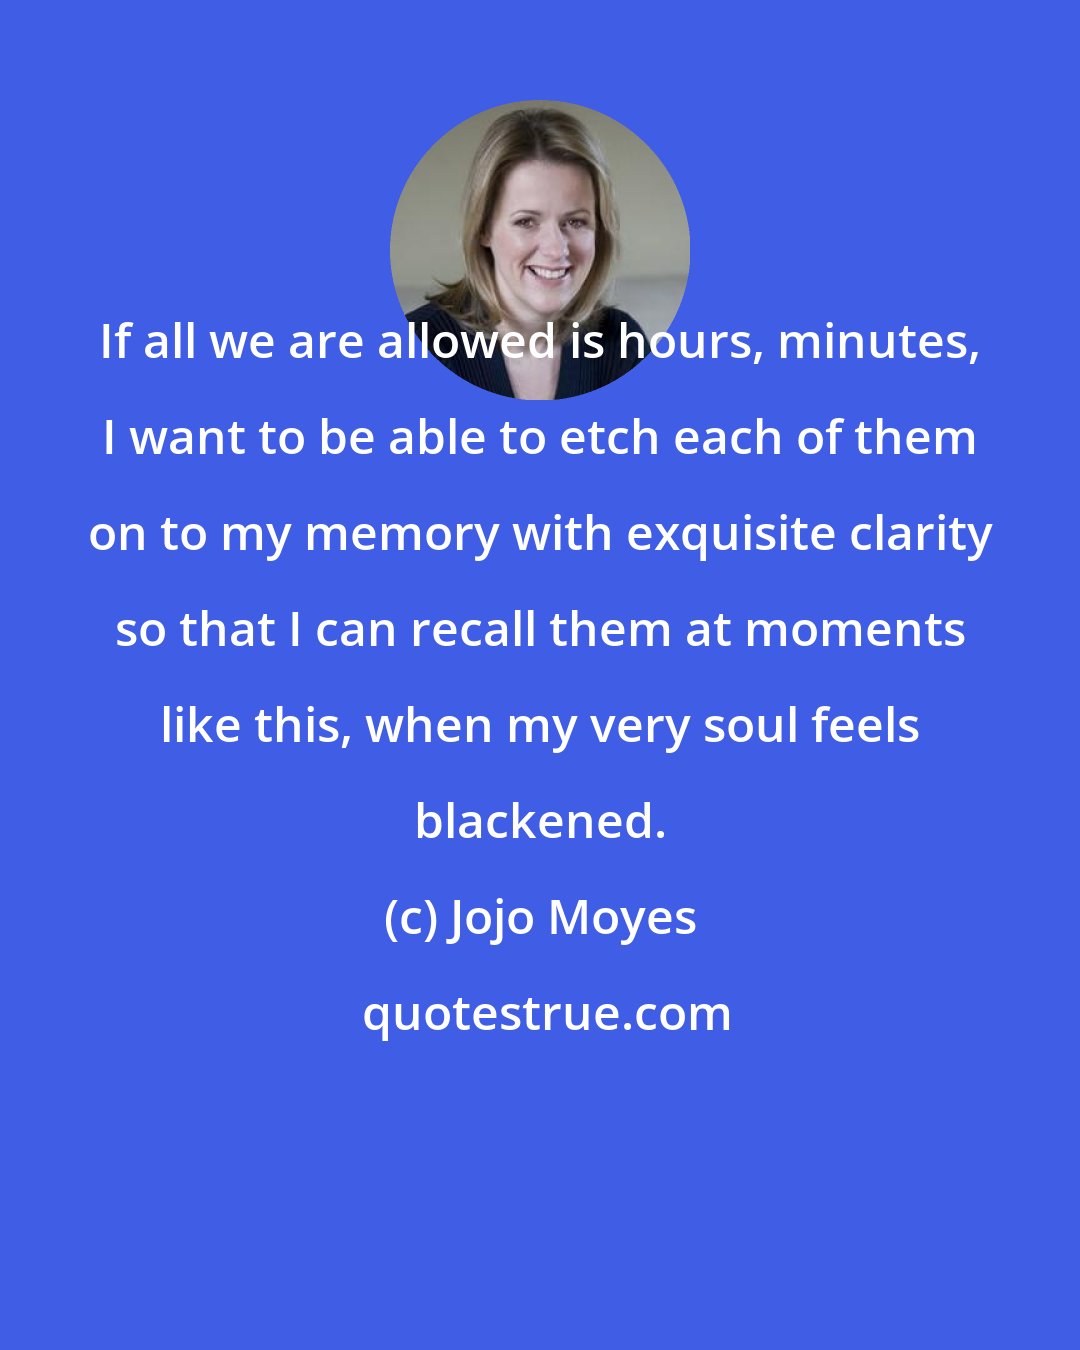 Jojo Moyes: If all we are allowed is hours, minutes, I want to be able to etch each of them on to my memory with exquisite clarity so that I can recall them at moments like this, when my very soul feels blackened.